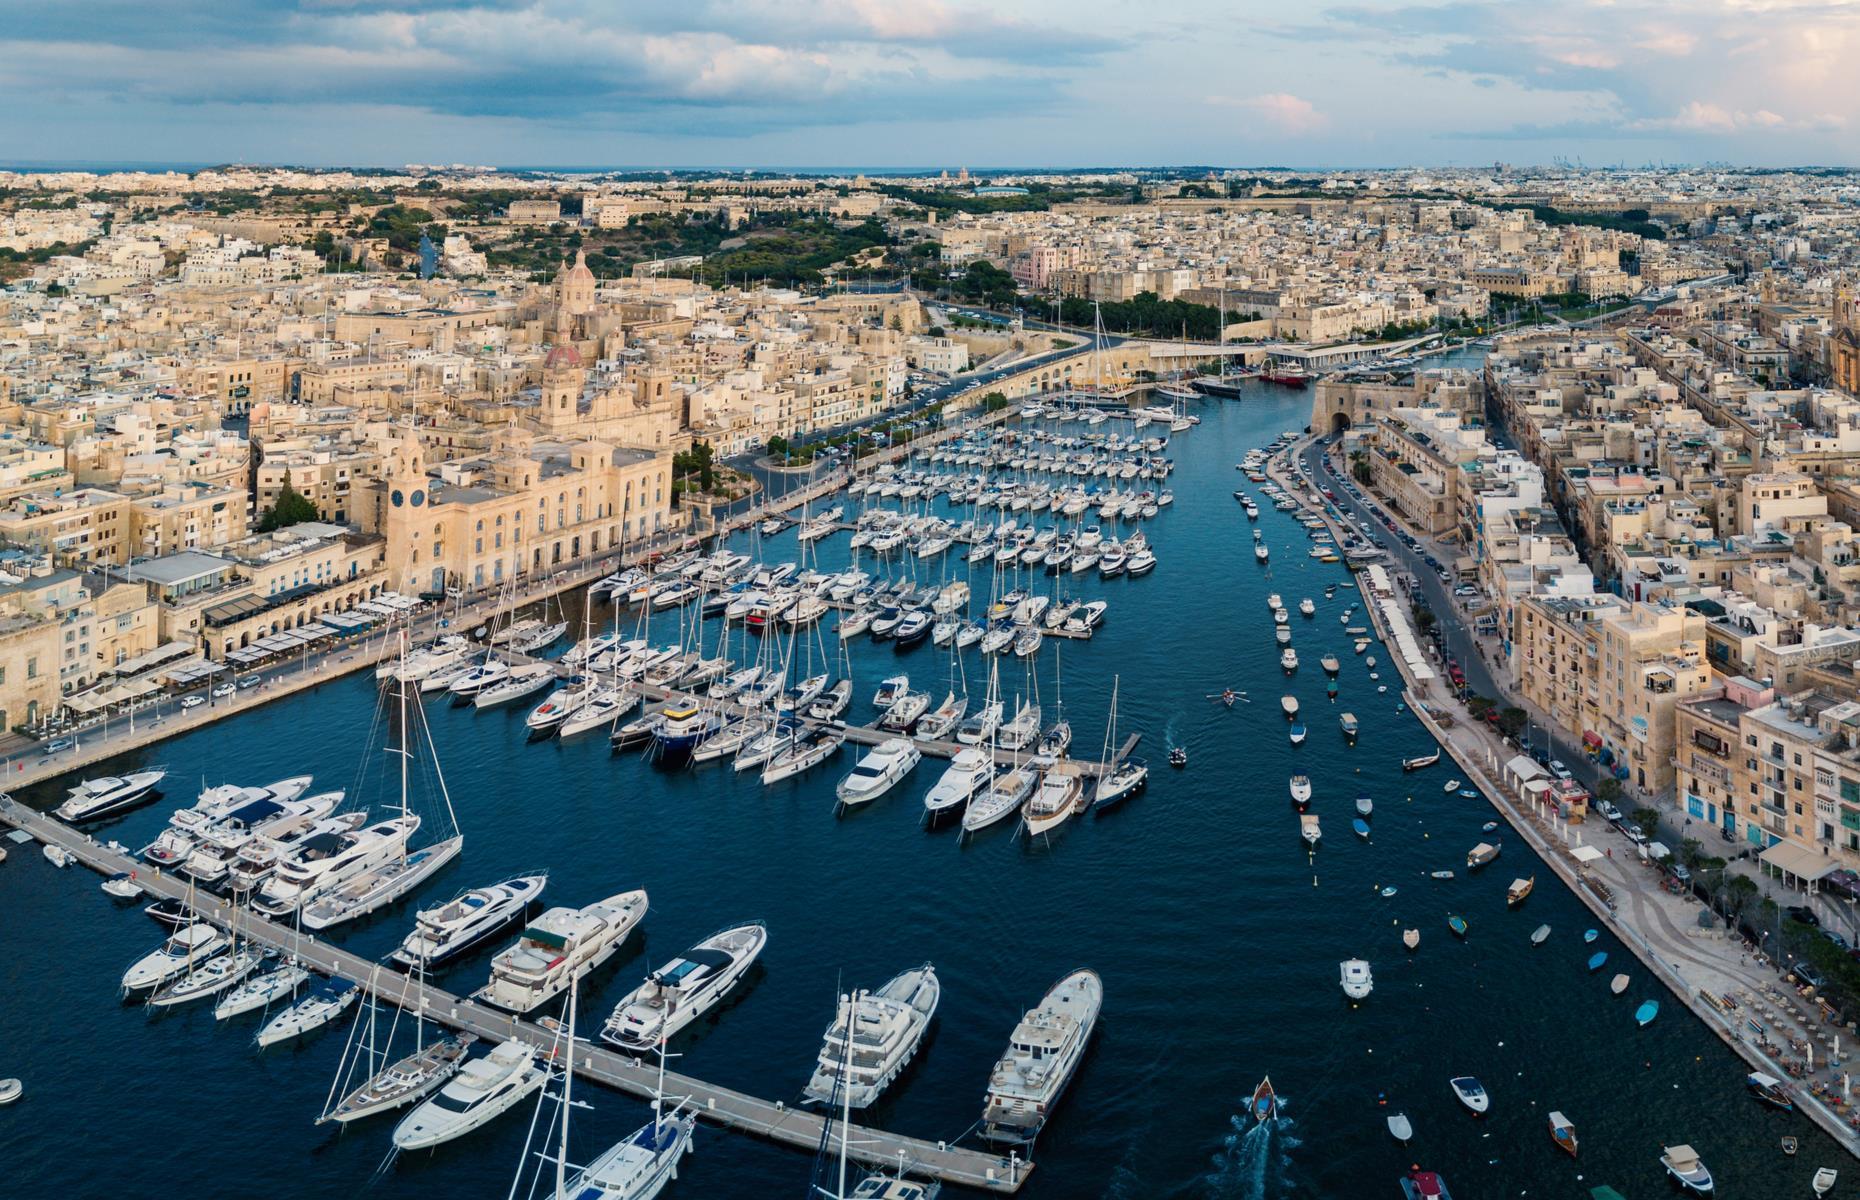 We’ve rounded up a selection of aerial photographs of the world's most incredible ports so you can check them out with a bird's-eye without taking to the skies. From Nordic beauties to Caribbean stunners, set sail on a virtual voyage around the prettiest ports on the planet.